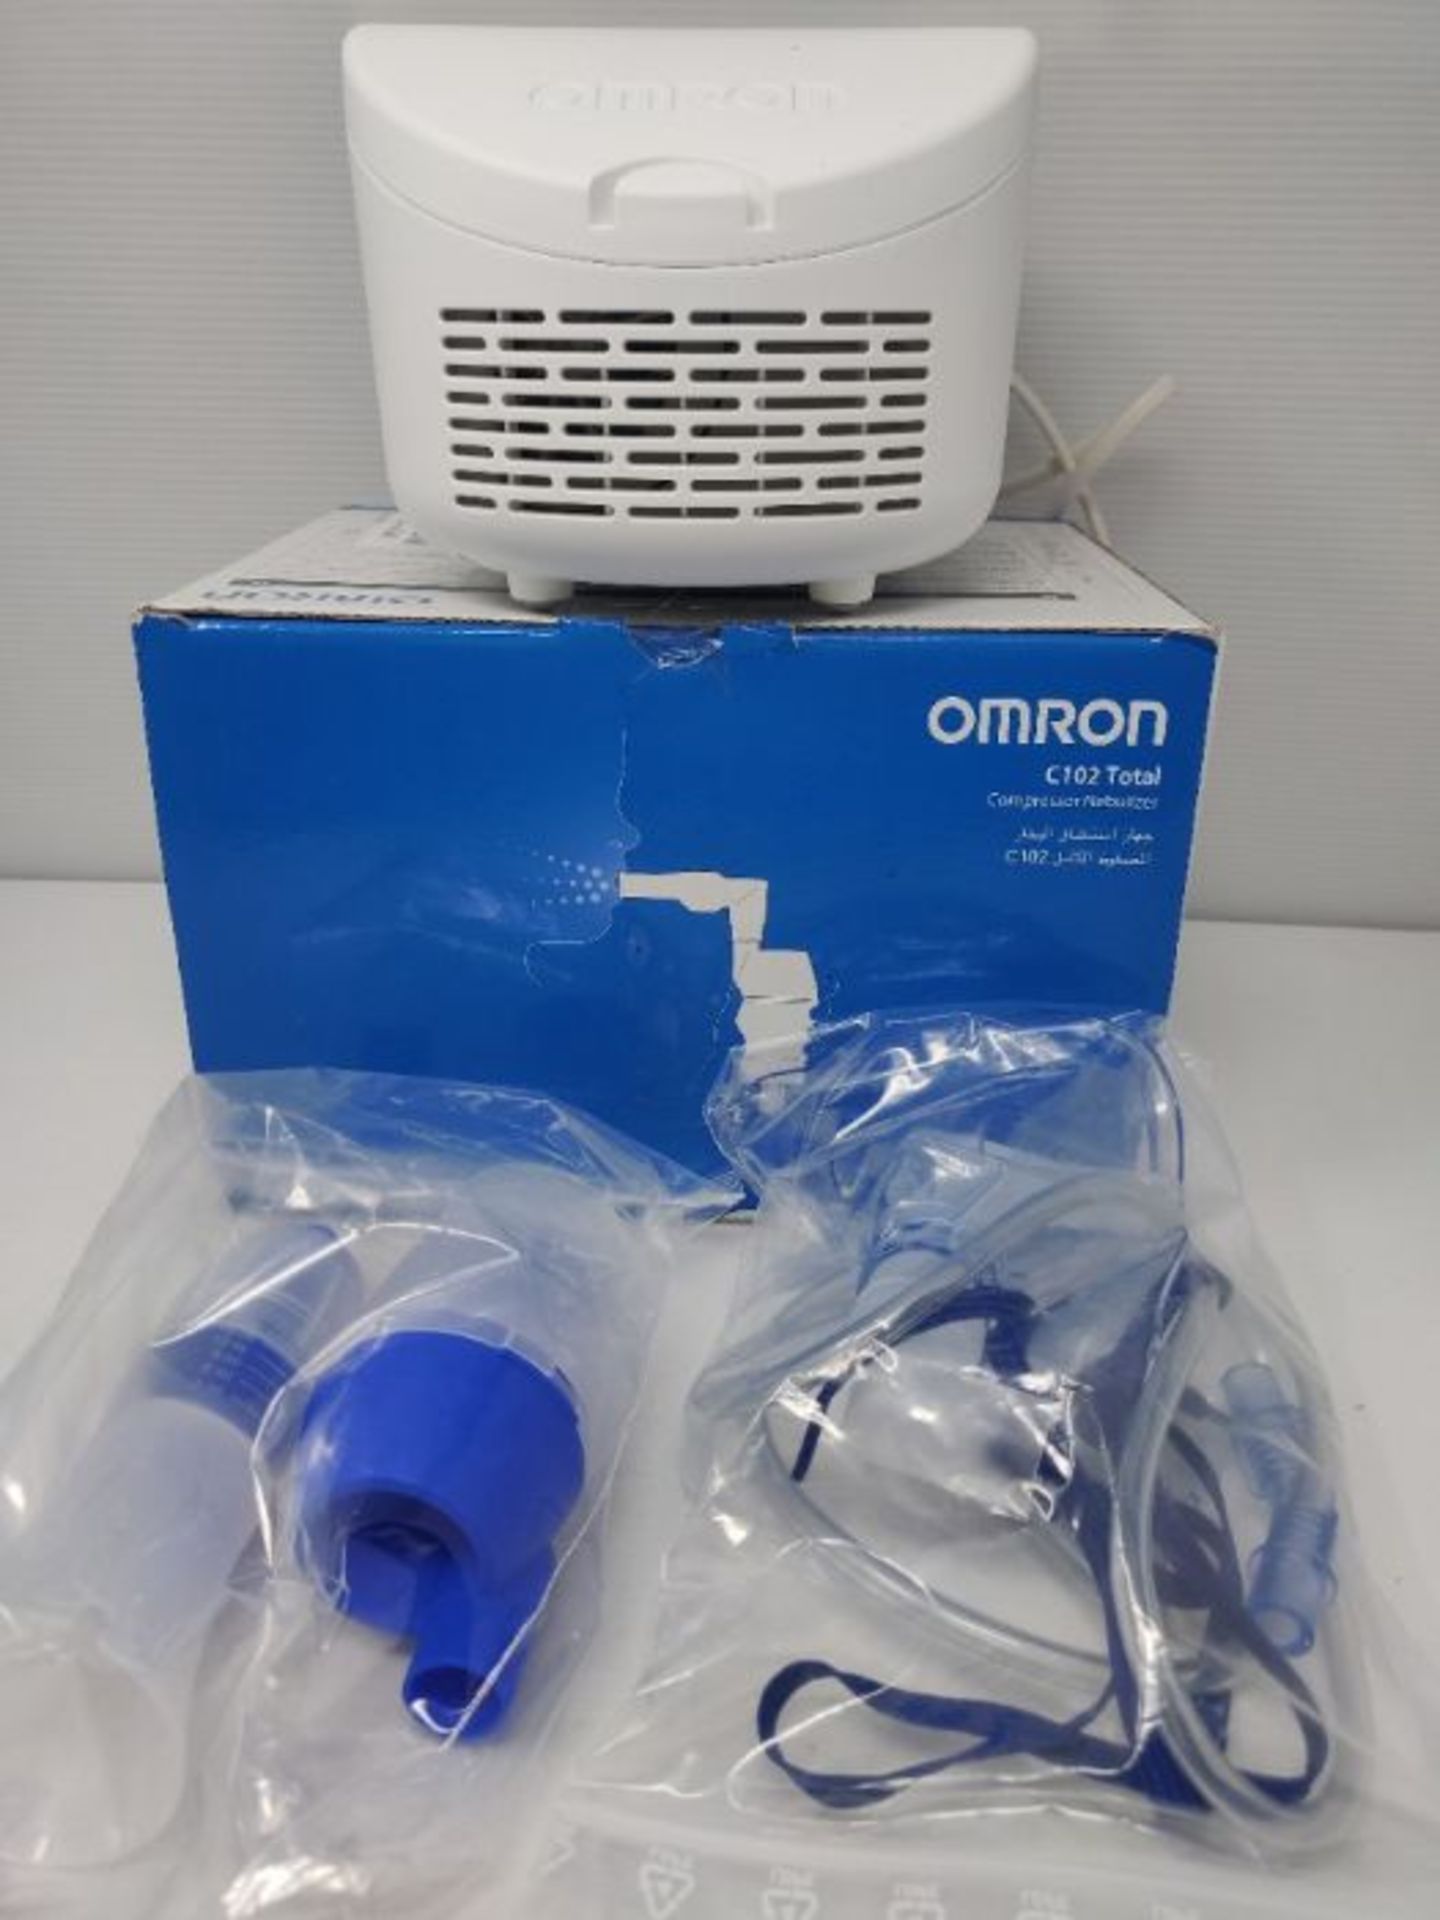 RRP £59.00 OMRON C102 Total 2-in-1 Nebuliser with Nasal Shower - Image 2 of 2